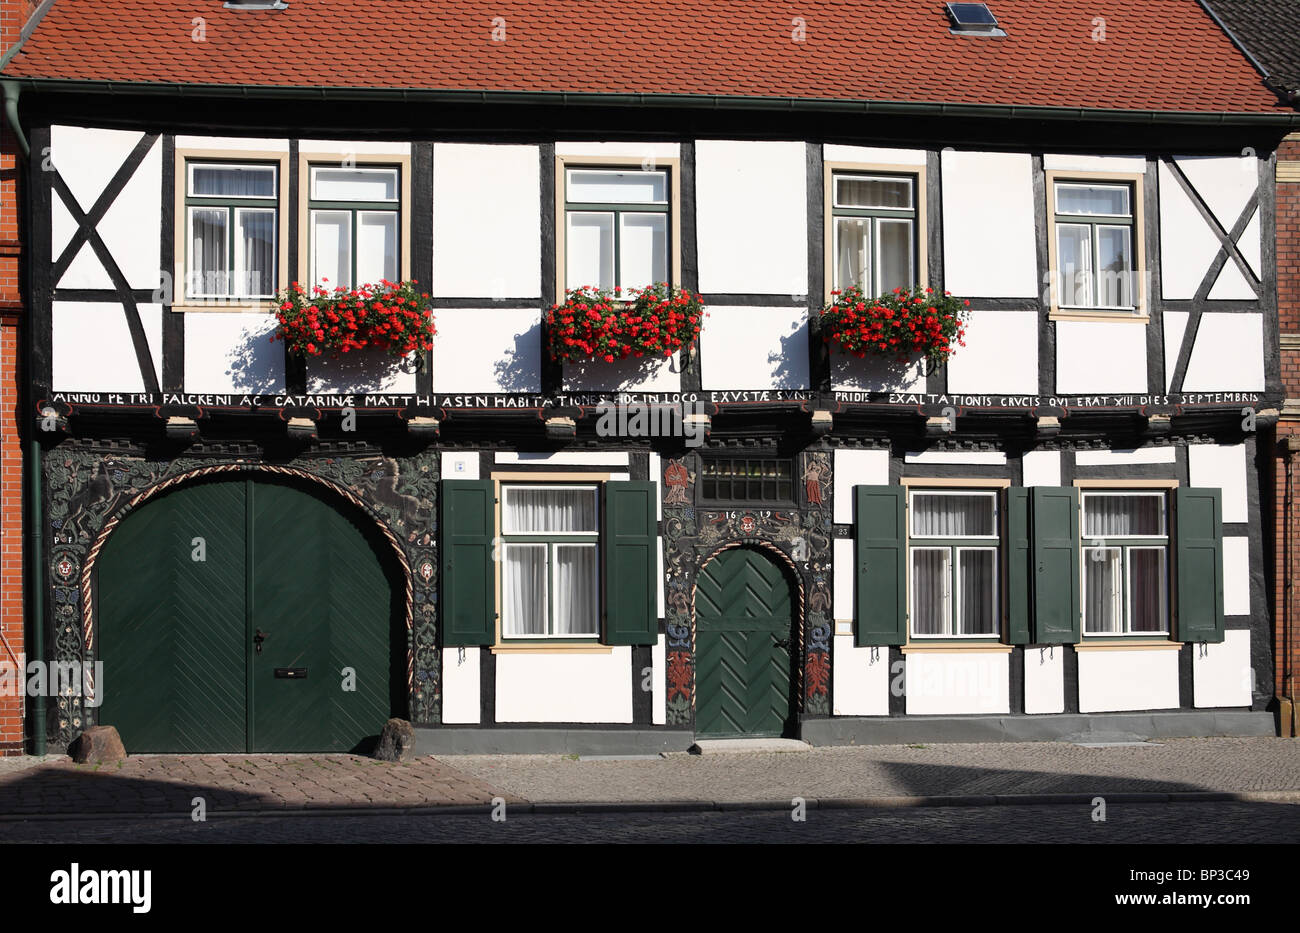 A 17th century half timbered house  in Tangermünde, a town on the river Elbe, Germany Stock Photo